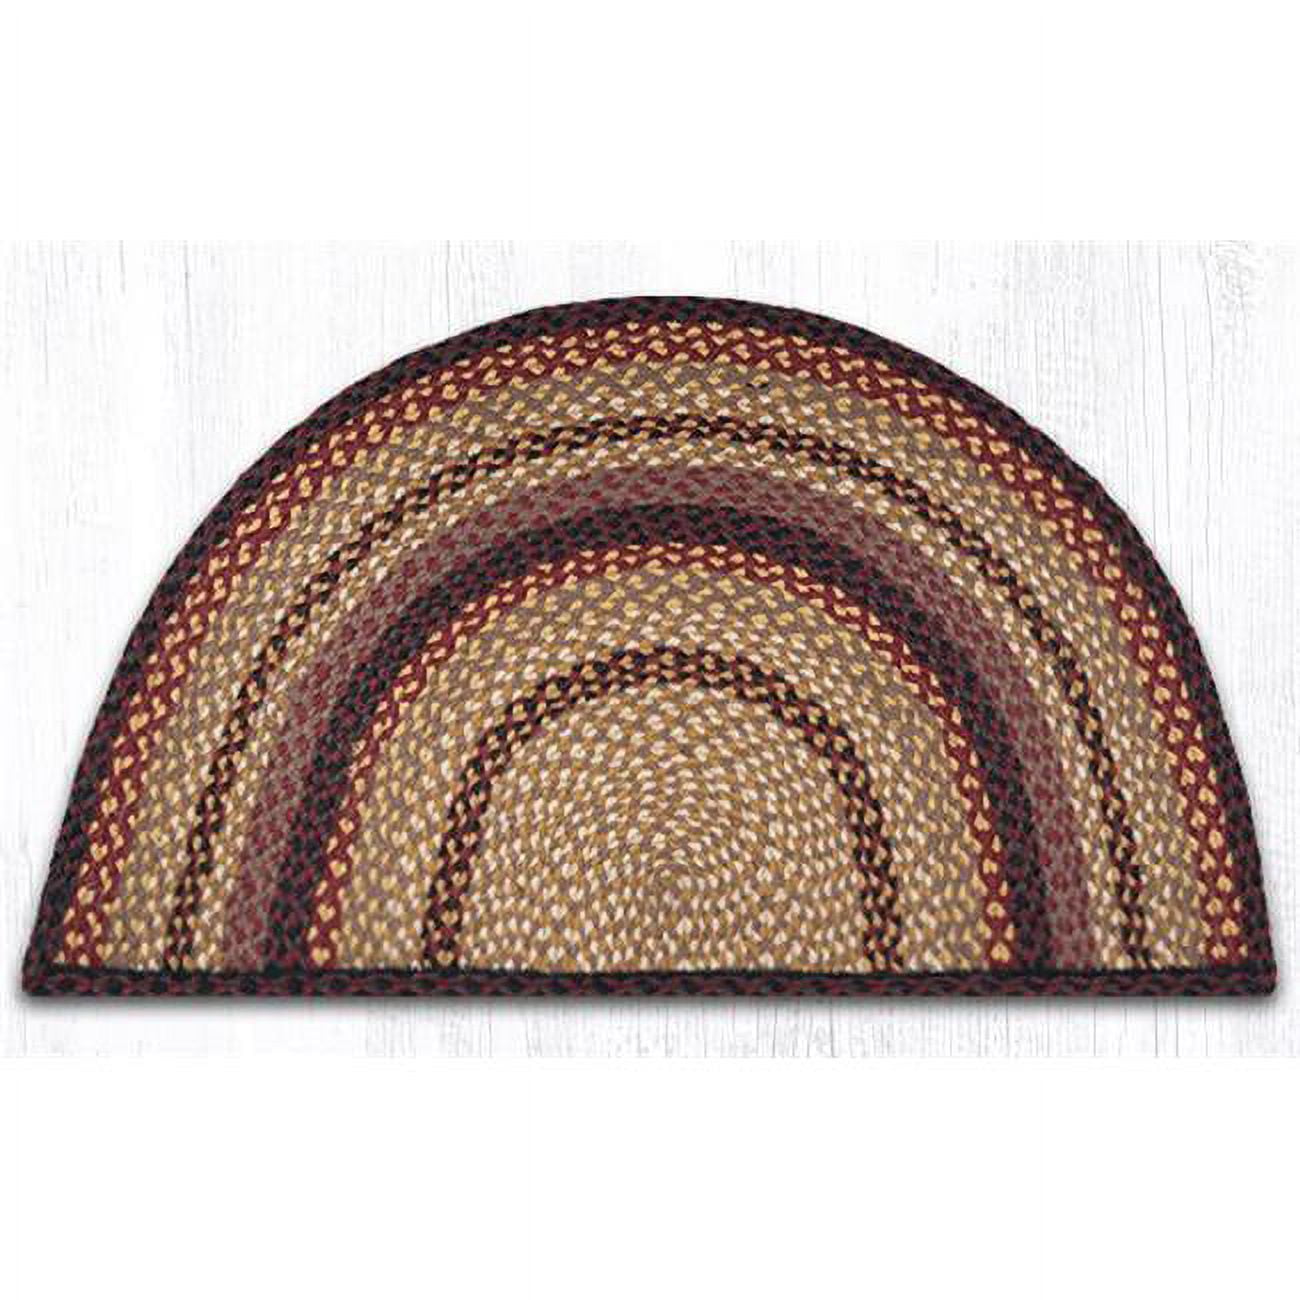 Picture of Capitol Importing 32-LG371 24 x 39 in. Braided Rug Slice, Black Cherry, Chocolate & Cream